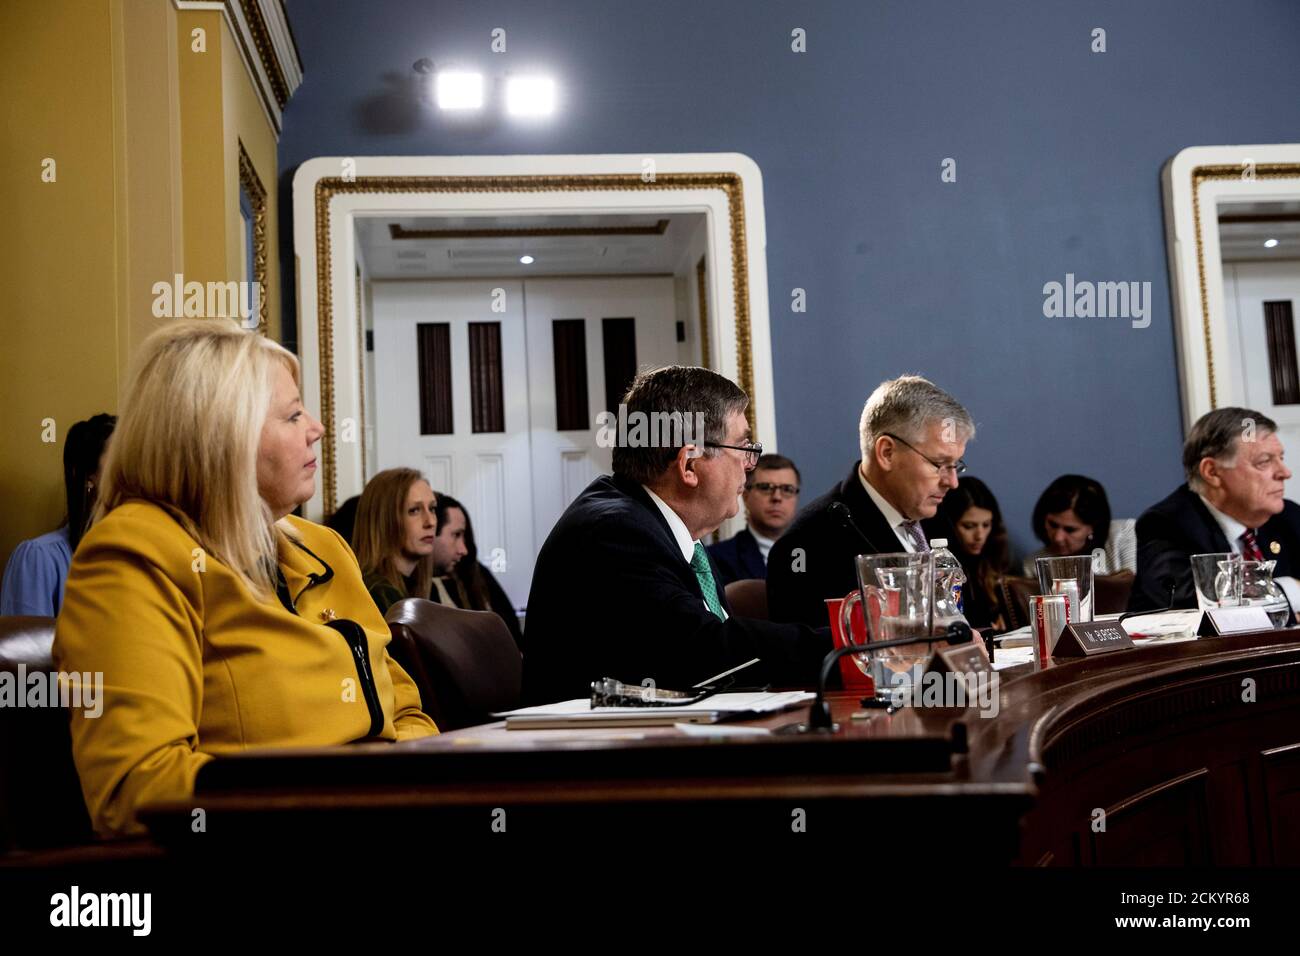 Rep. Michael Burgess (R-TX) speaks at a House Committee on Rules hearing to consider H. Res. 755 'Impeaching Donald John Trump, President of the United States, for high crimes and misdemeanors' in Washington, U.S. December 17, 2019. Anna Moneymaker/Pool via REUTERS Stock Photo